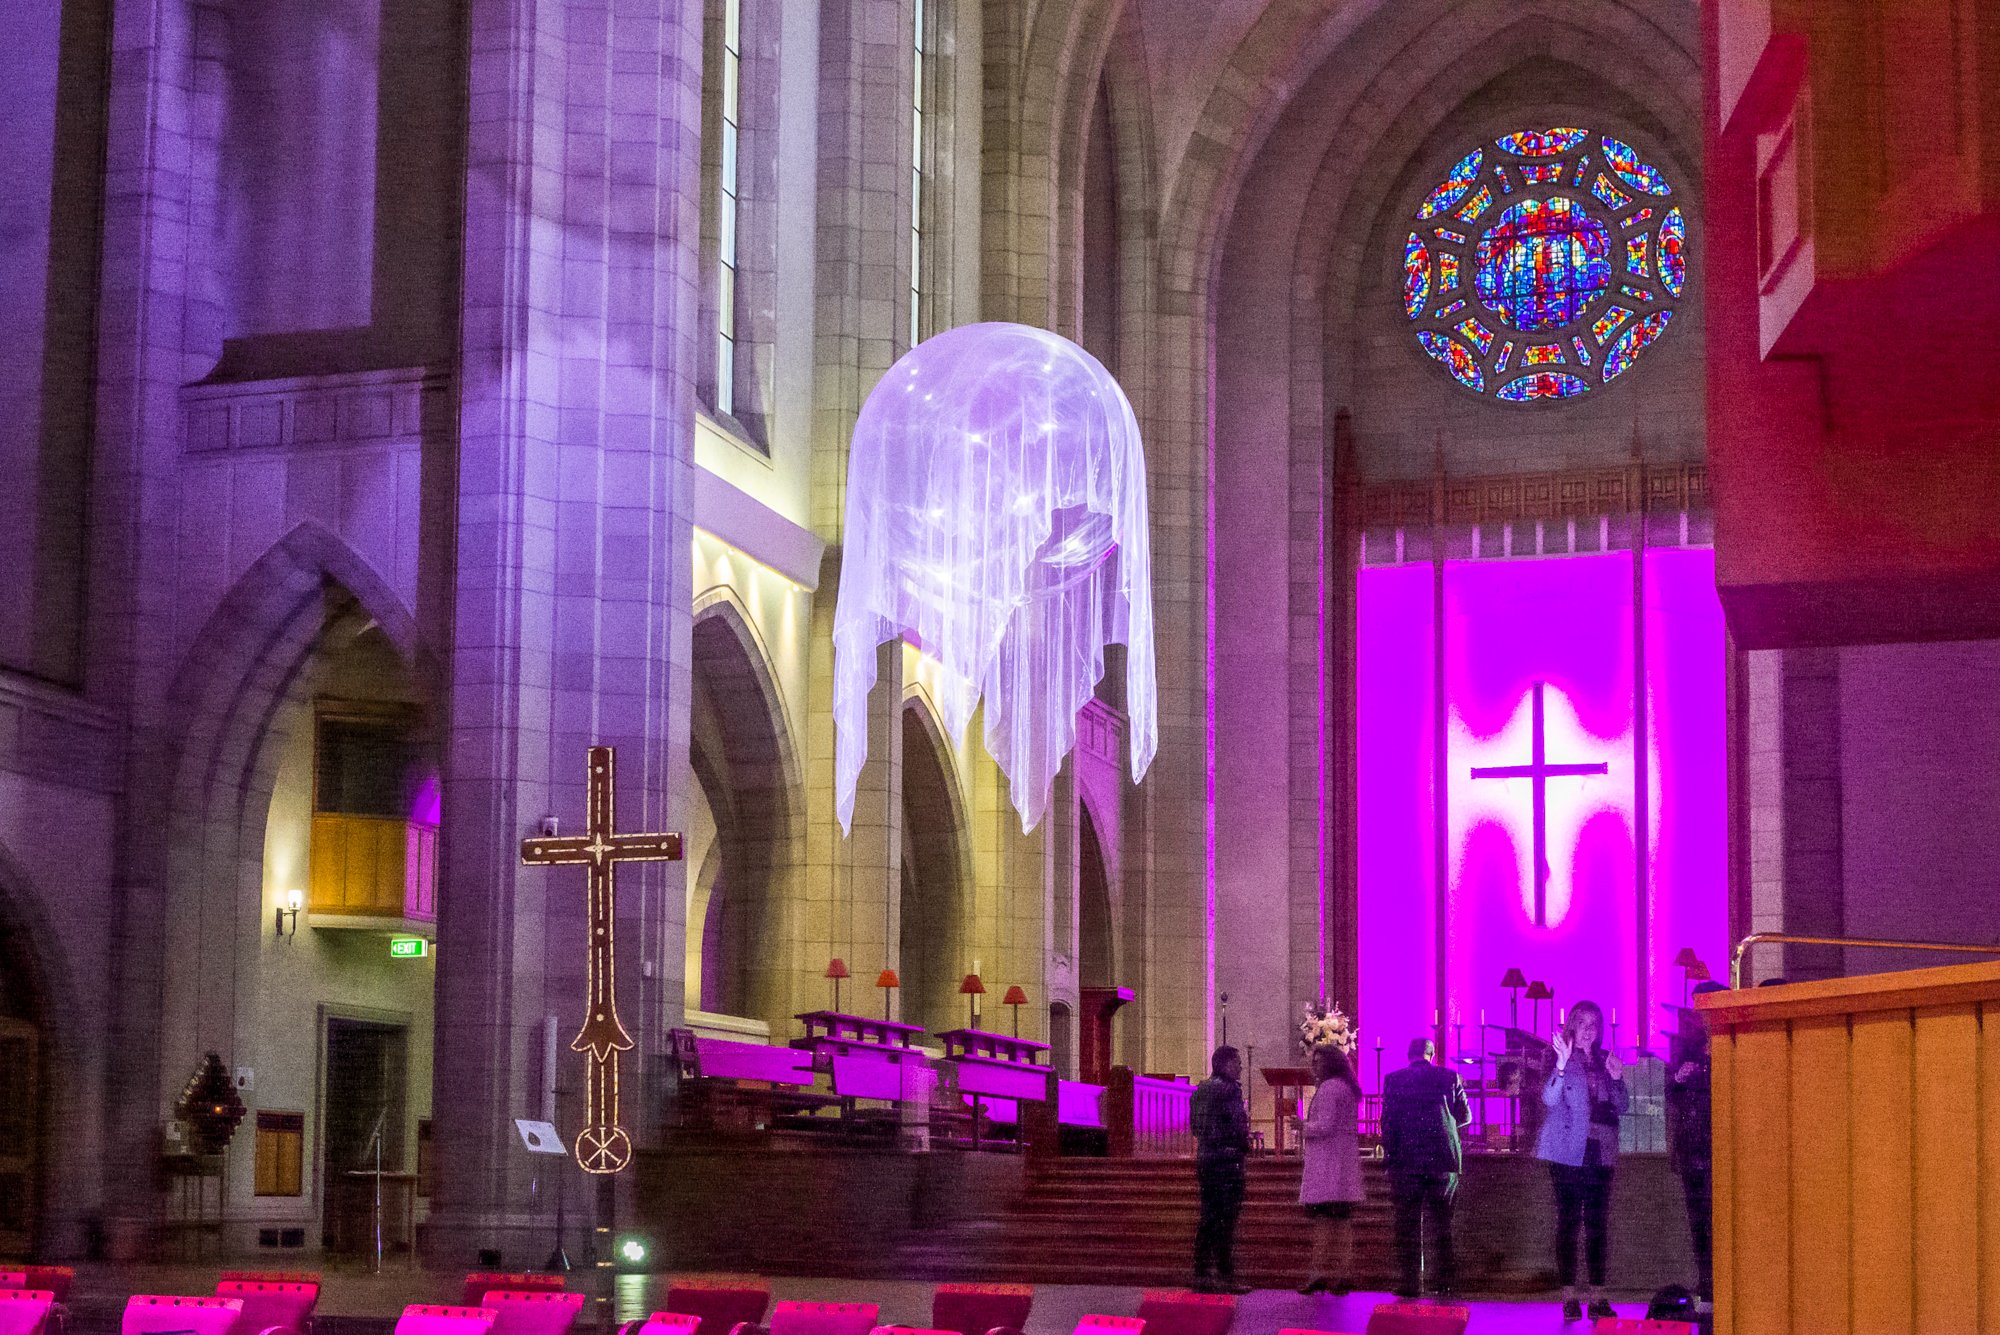   Awakenings IV,  2021, sculptural installation, Artweek Auckland 2020, Holy Trinity Cathedral, Parnell, Auckland 